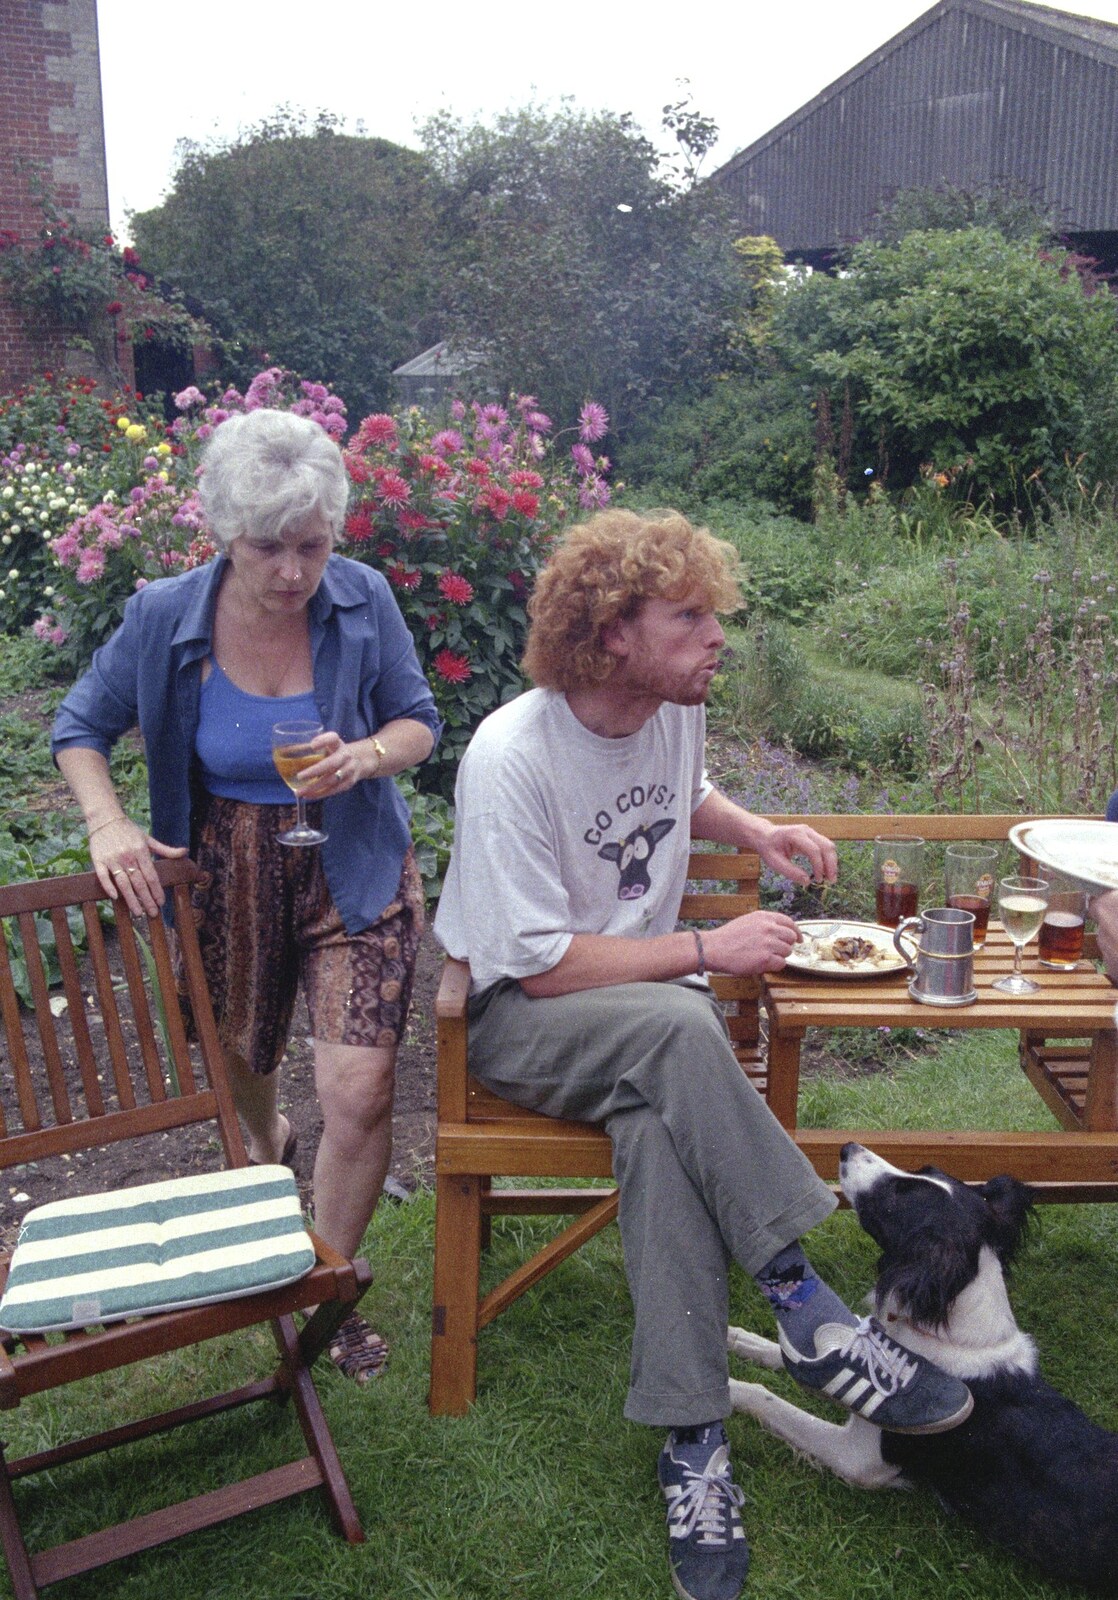 Spammy, Wavy, and Wellard the dog from A Mortlock Barbeque and a CISU Party, Suffolk - 11th July 1999